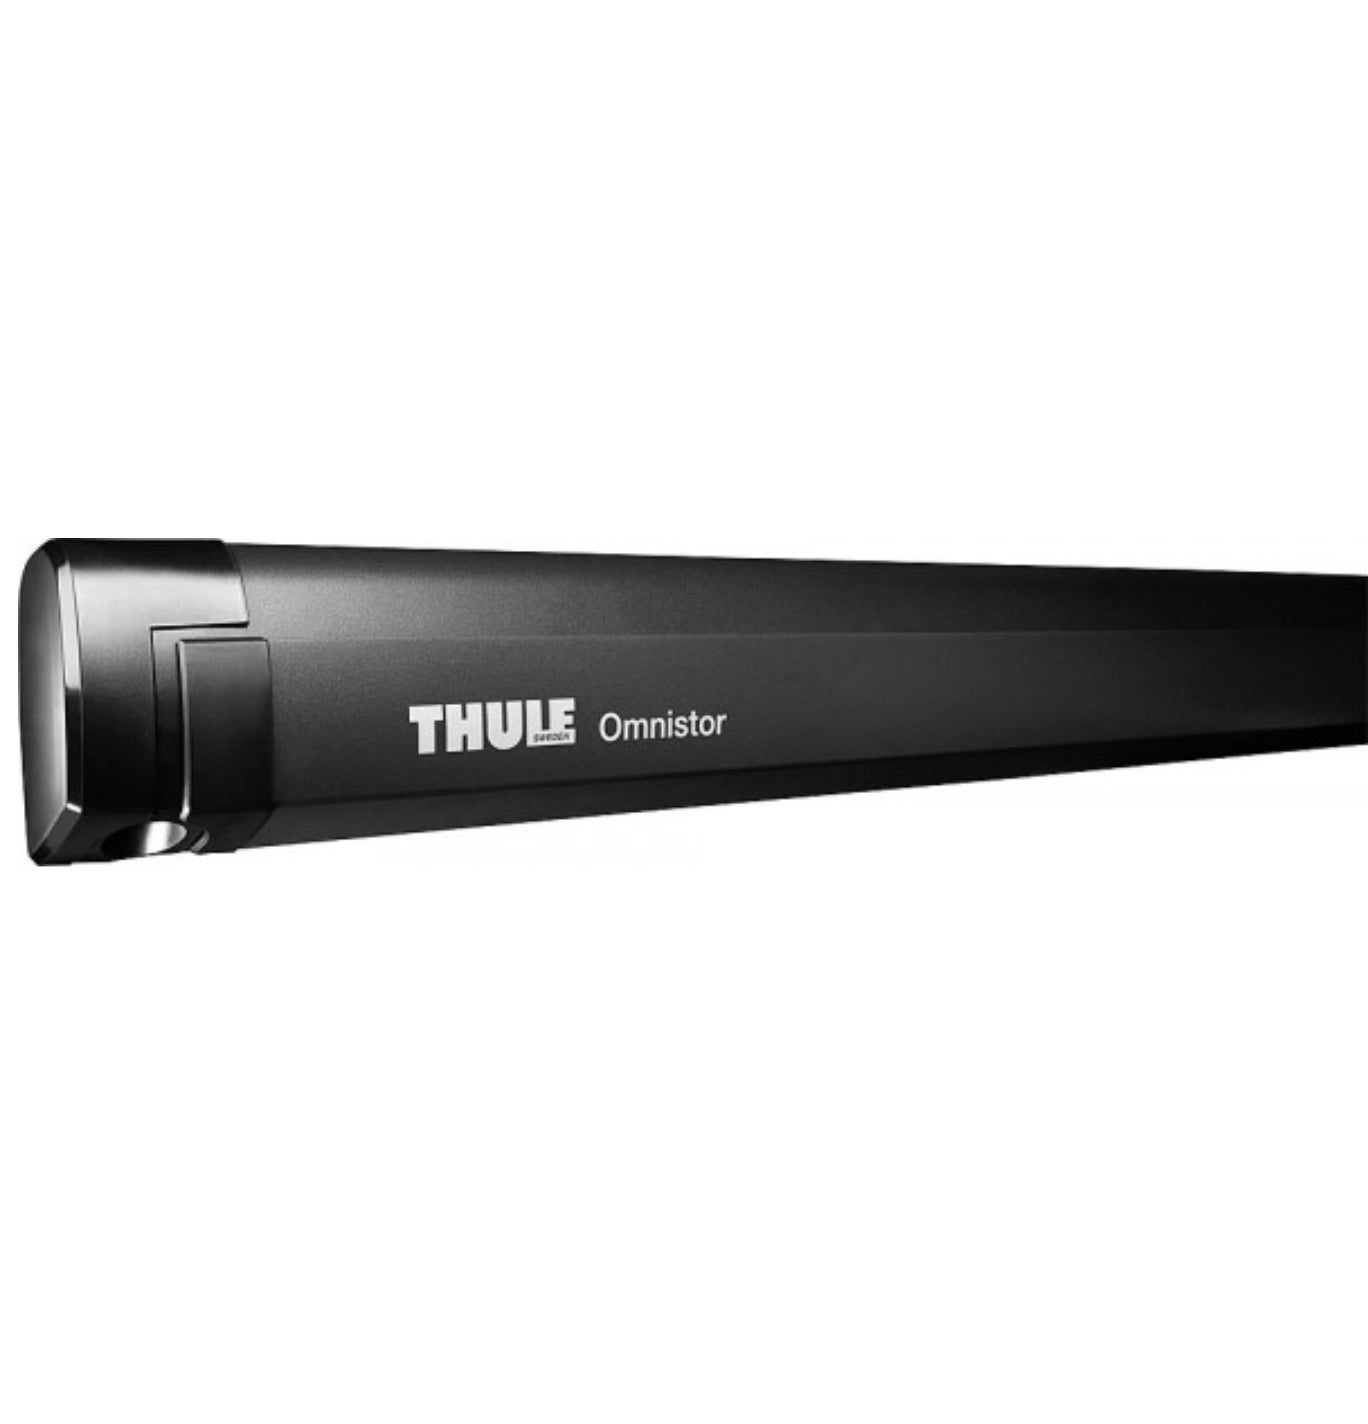 Thule Omnistor 4900 Awning Exclusive for Reimo MultiRail